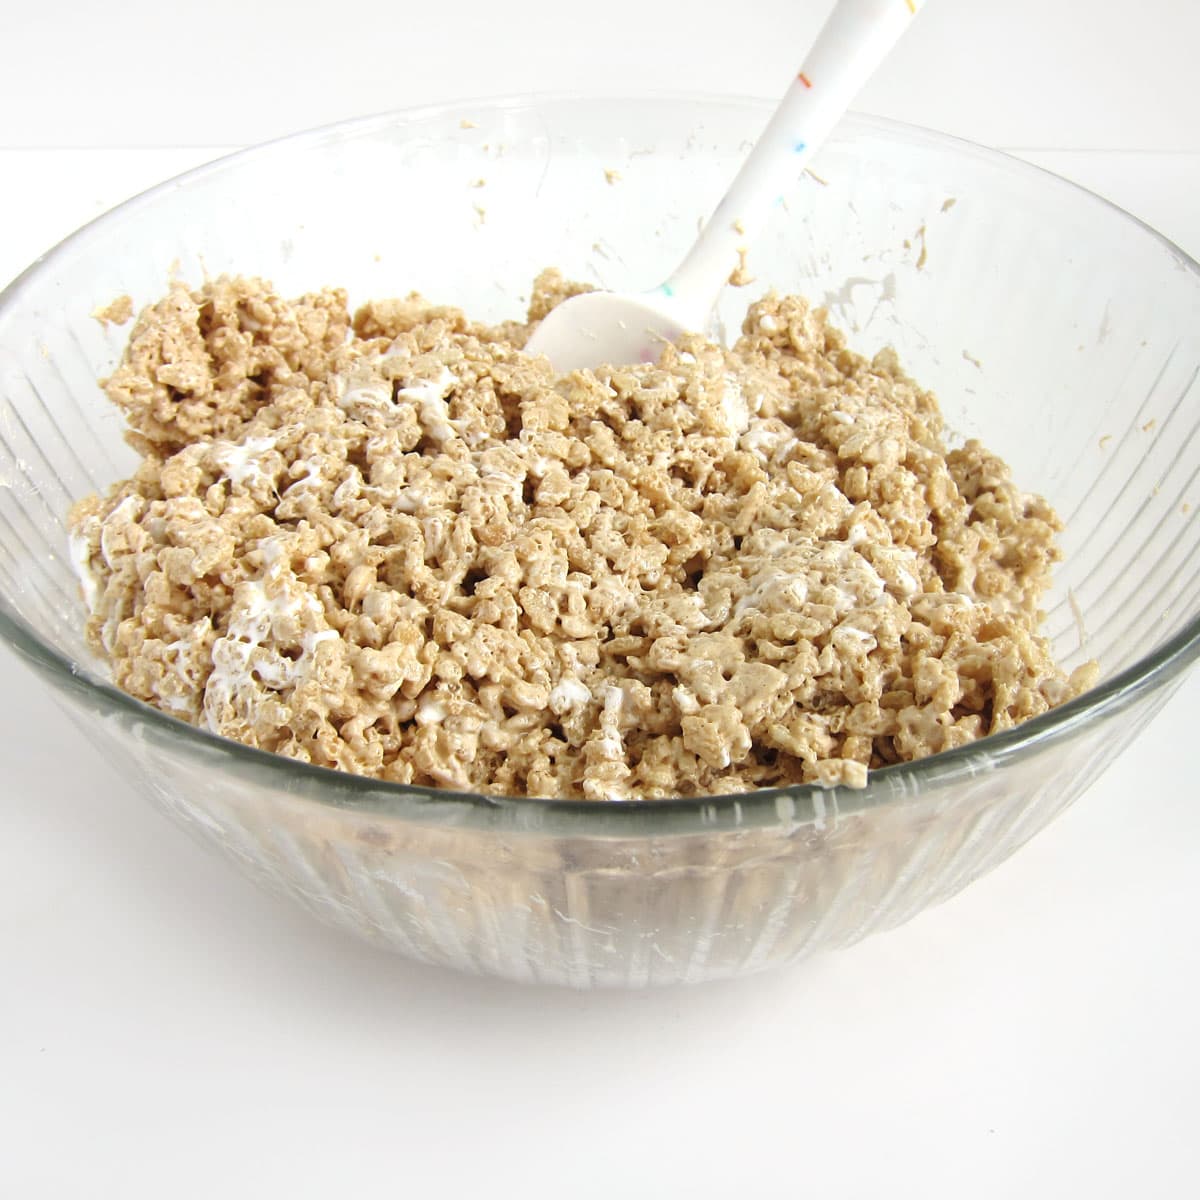 mixed Fluffernutter Rice Krispie Treats in a large mixing bowl.